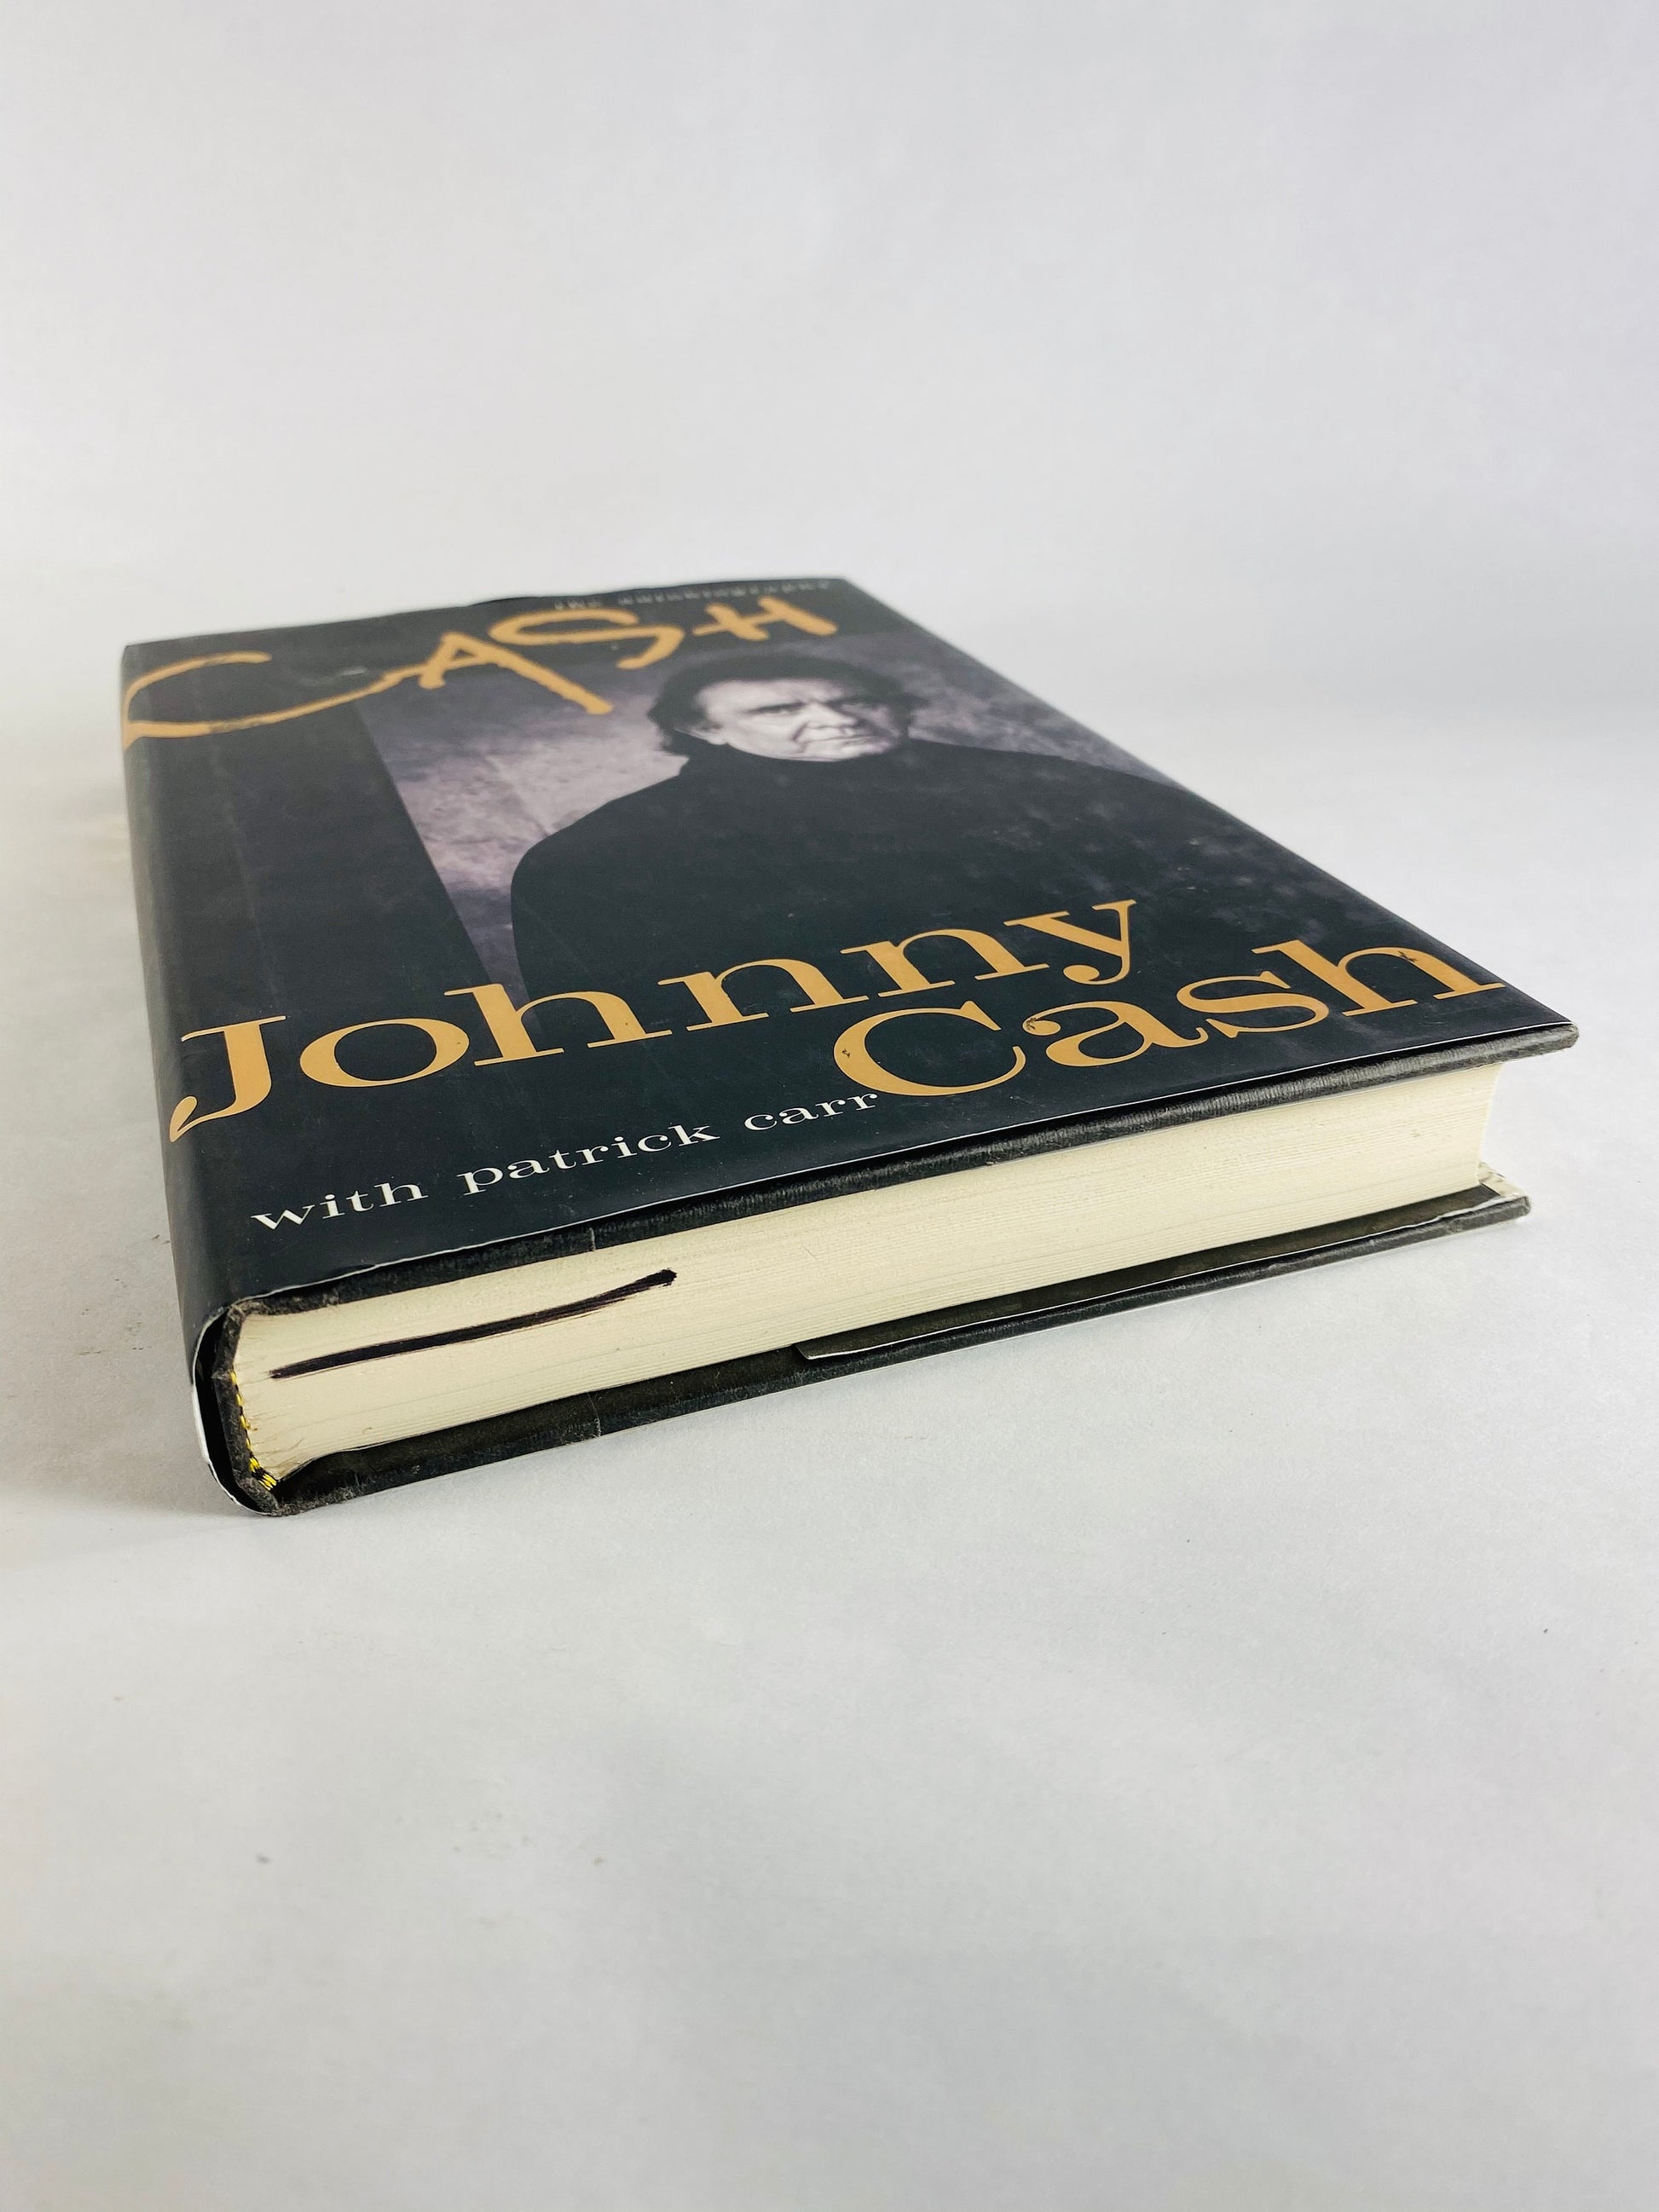 Johnny Cash FIRST EDITION vintage autobiography book with Patrick Carr circa 1997. Fantastic music gift Outlaw Country